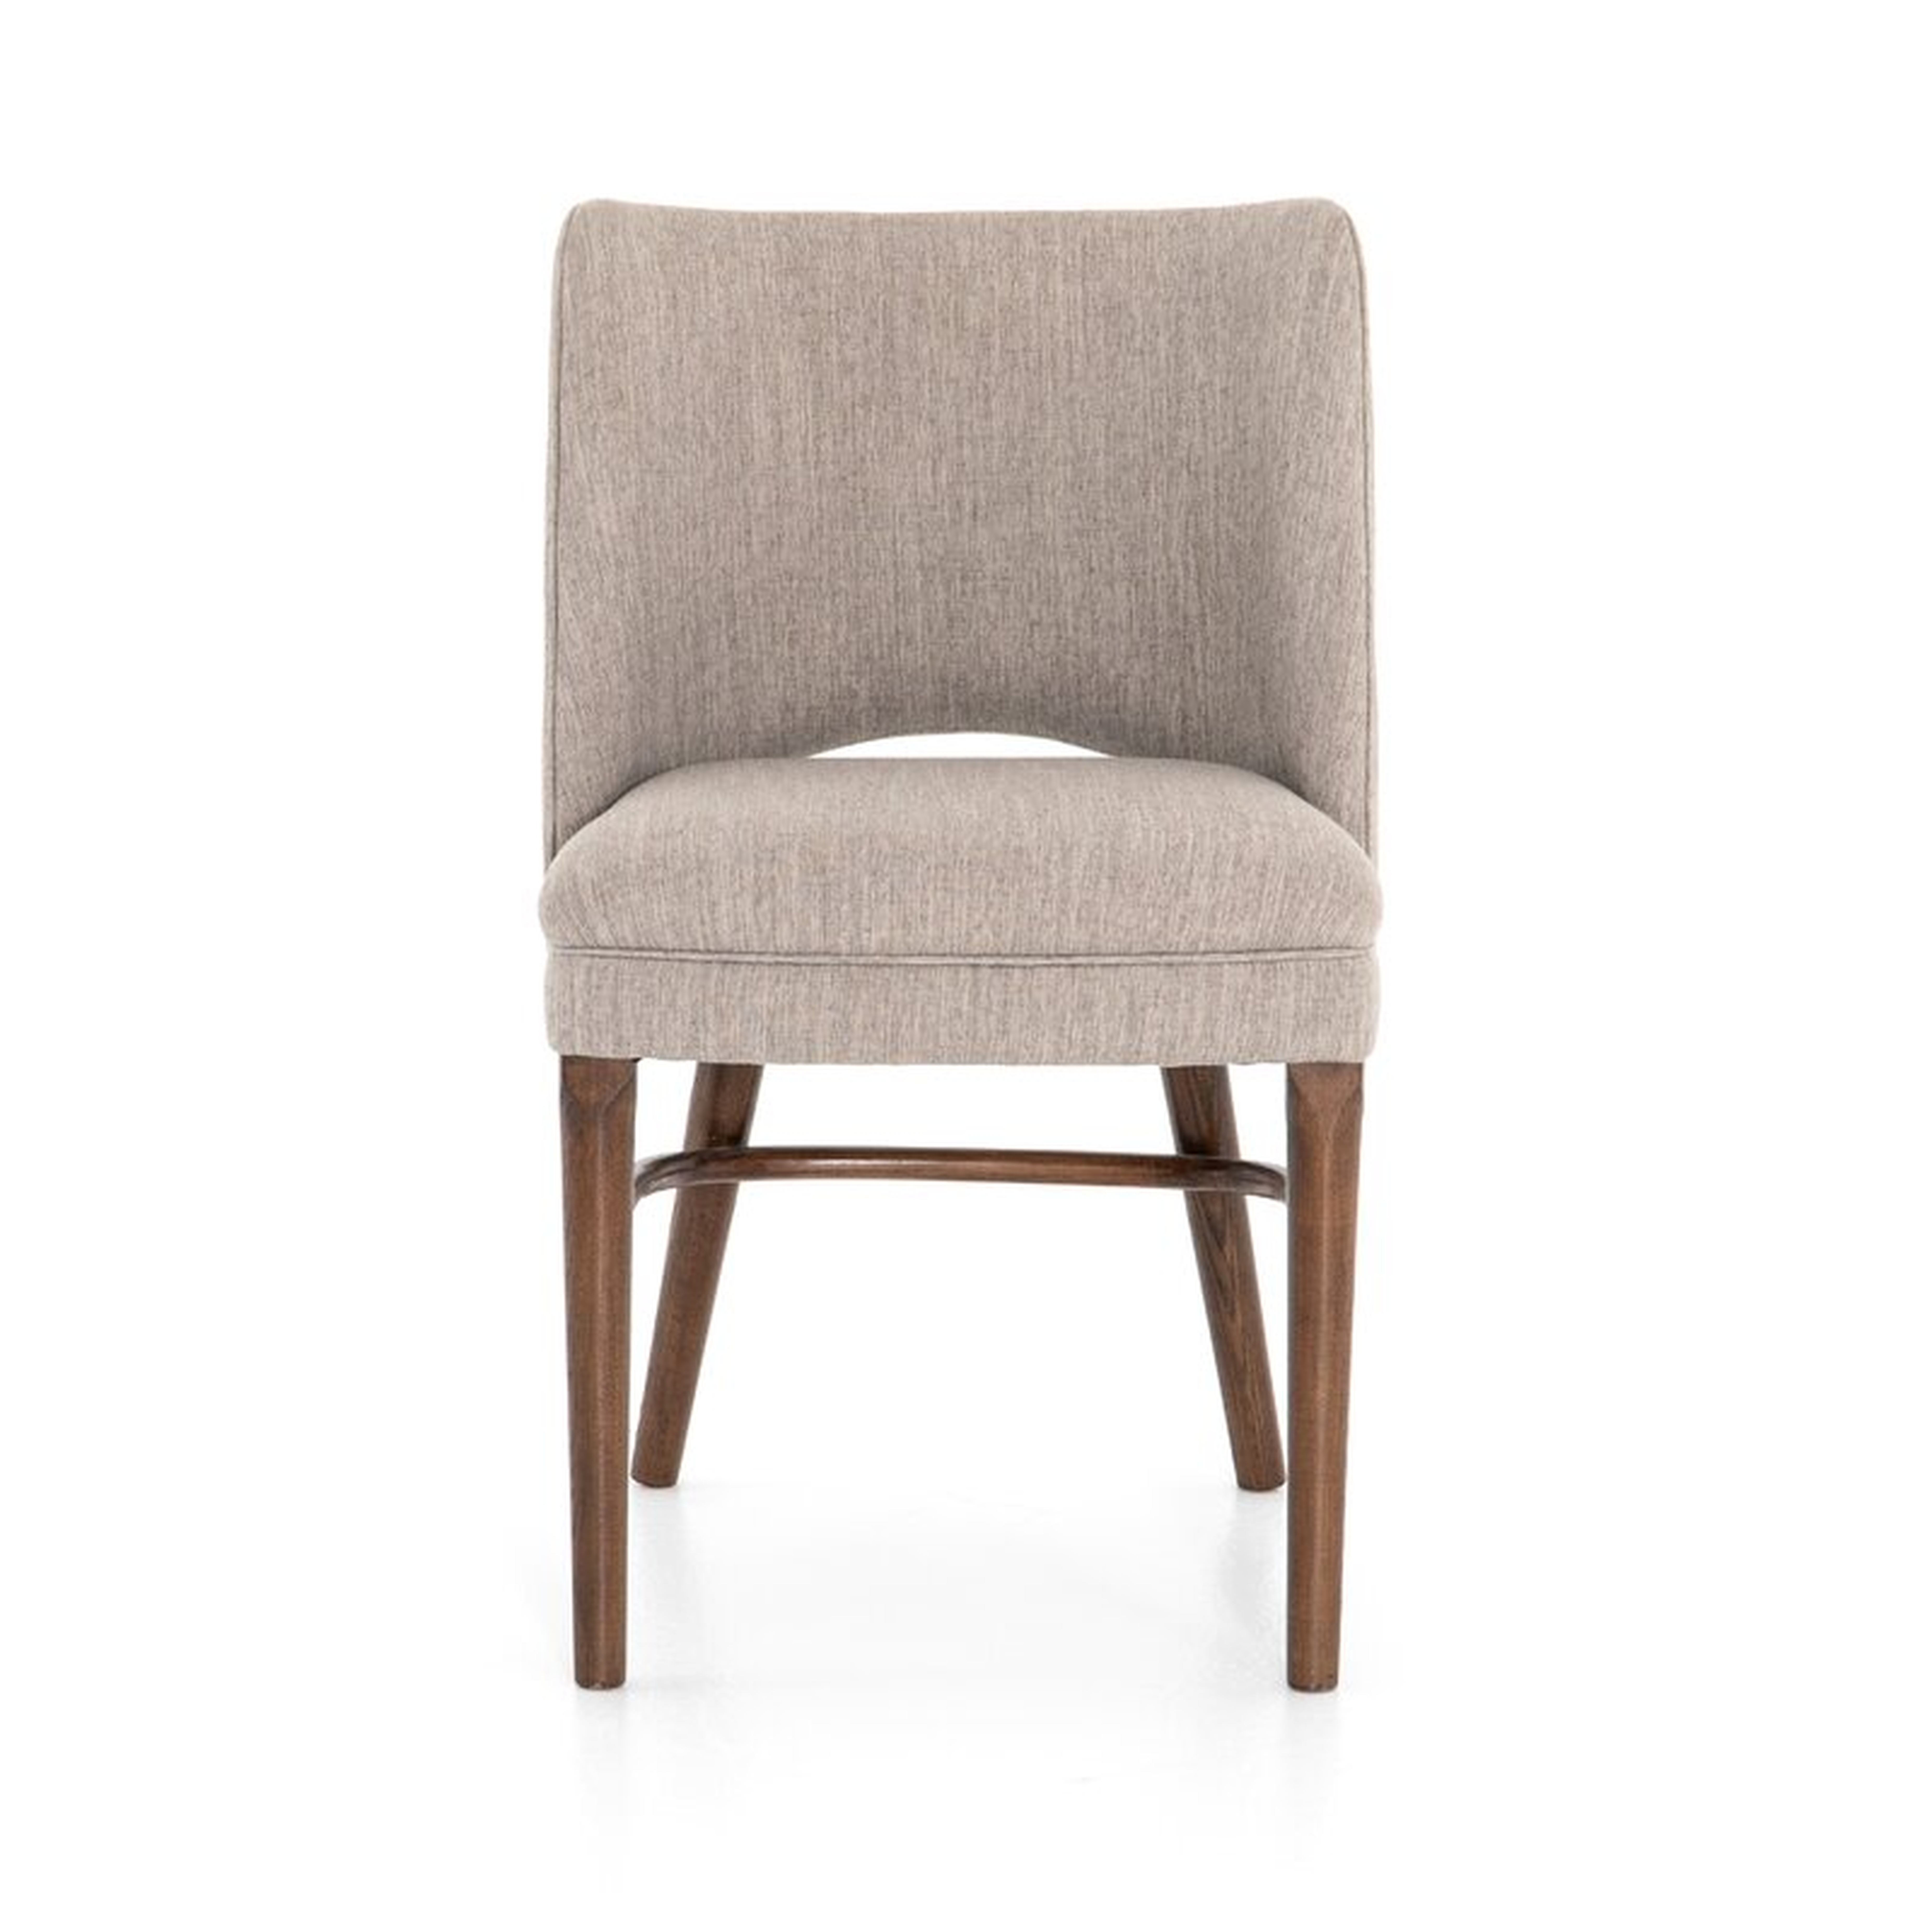 Four Hands Ashford Upholstered Solid Wood Side Chair in Savile Flannel - Perigold